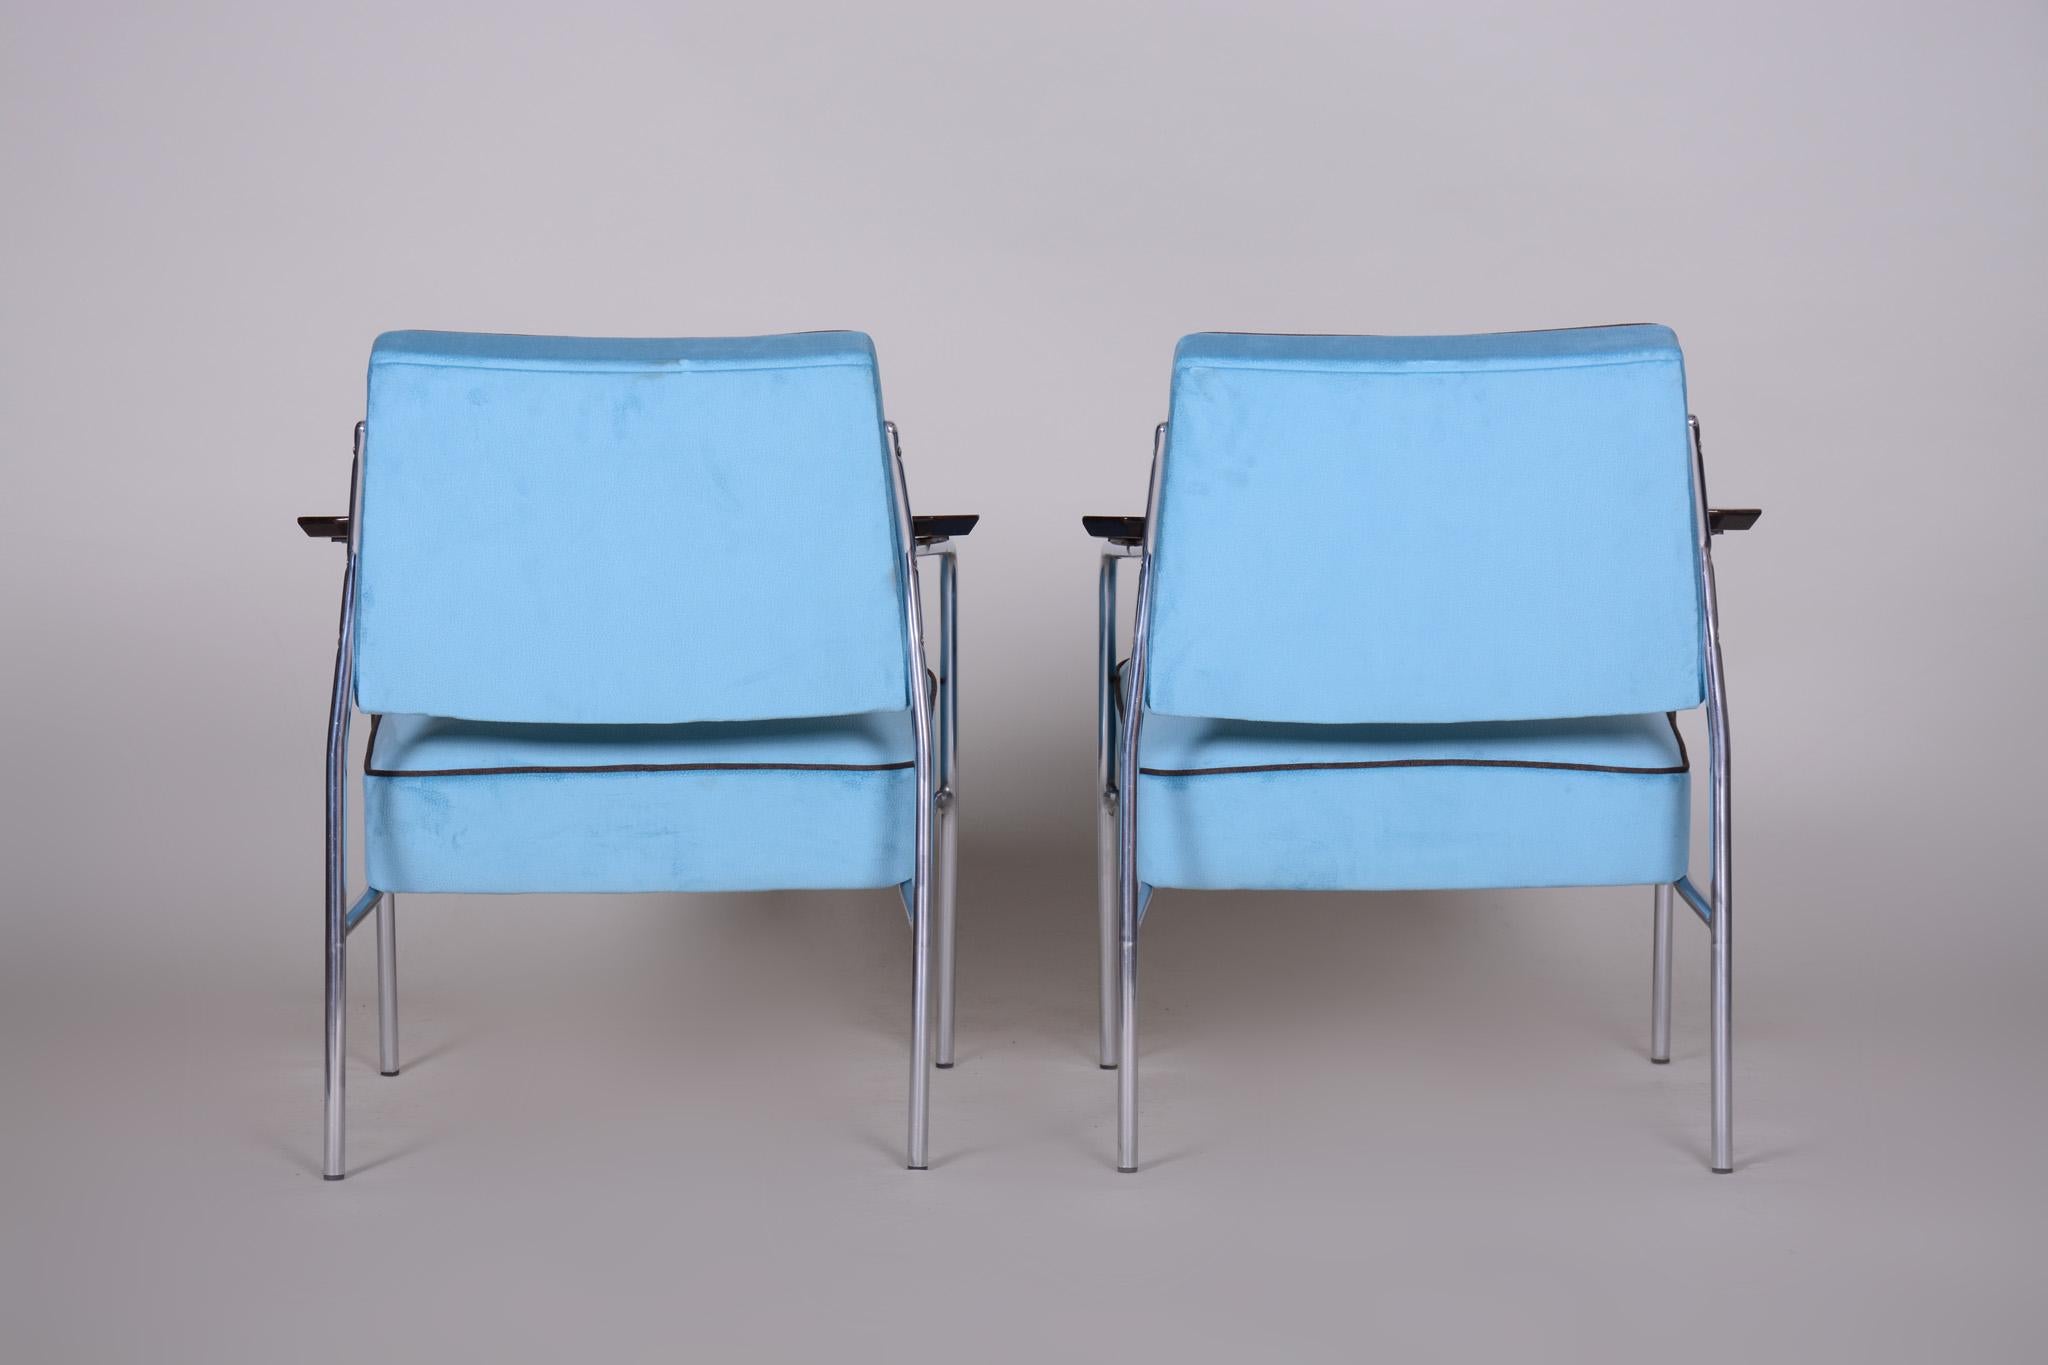 Tubular Chrome Bauhaus Blue Seating Set, 2 Armchairs and 4 Chairs, 1940s For Sale 1